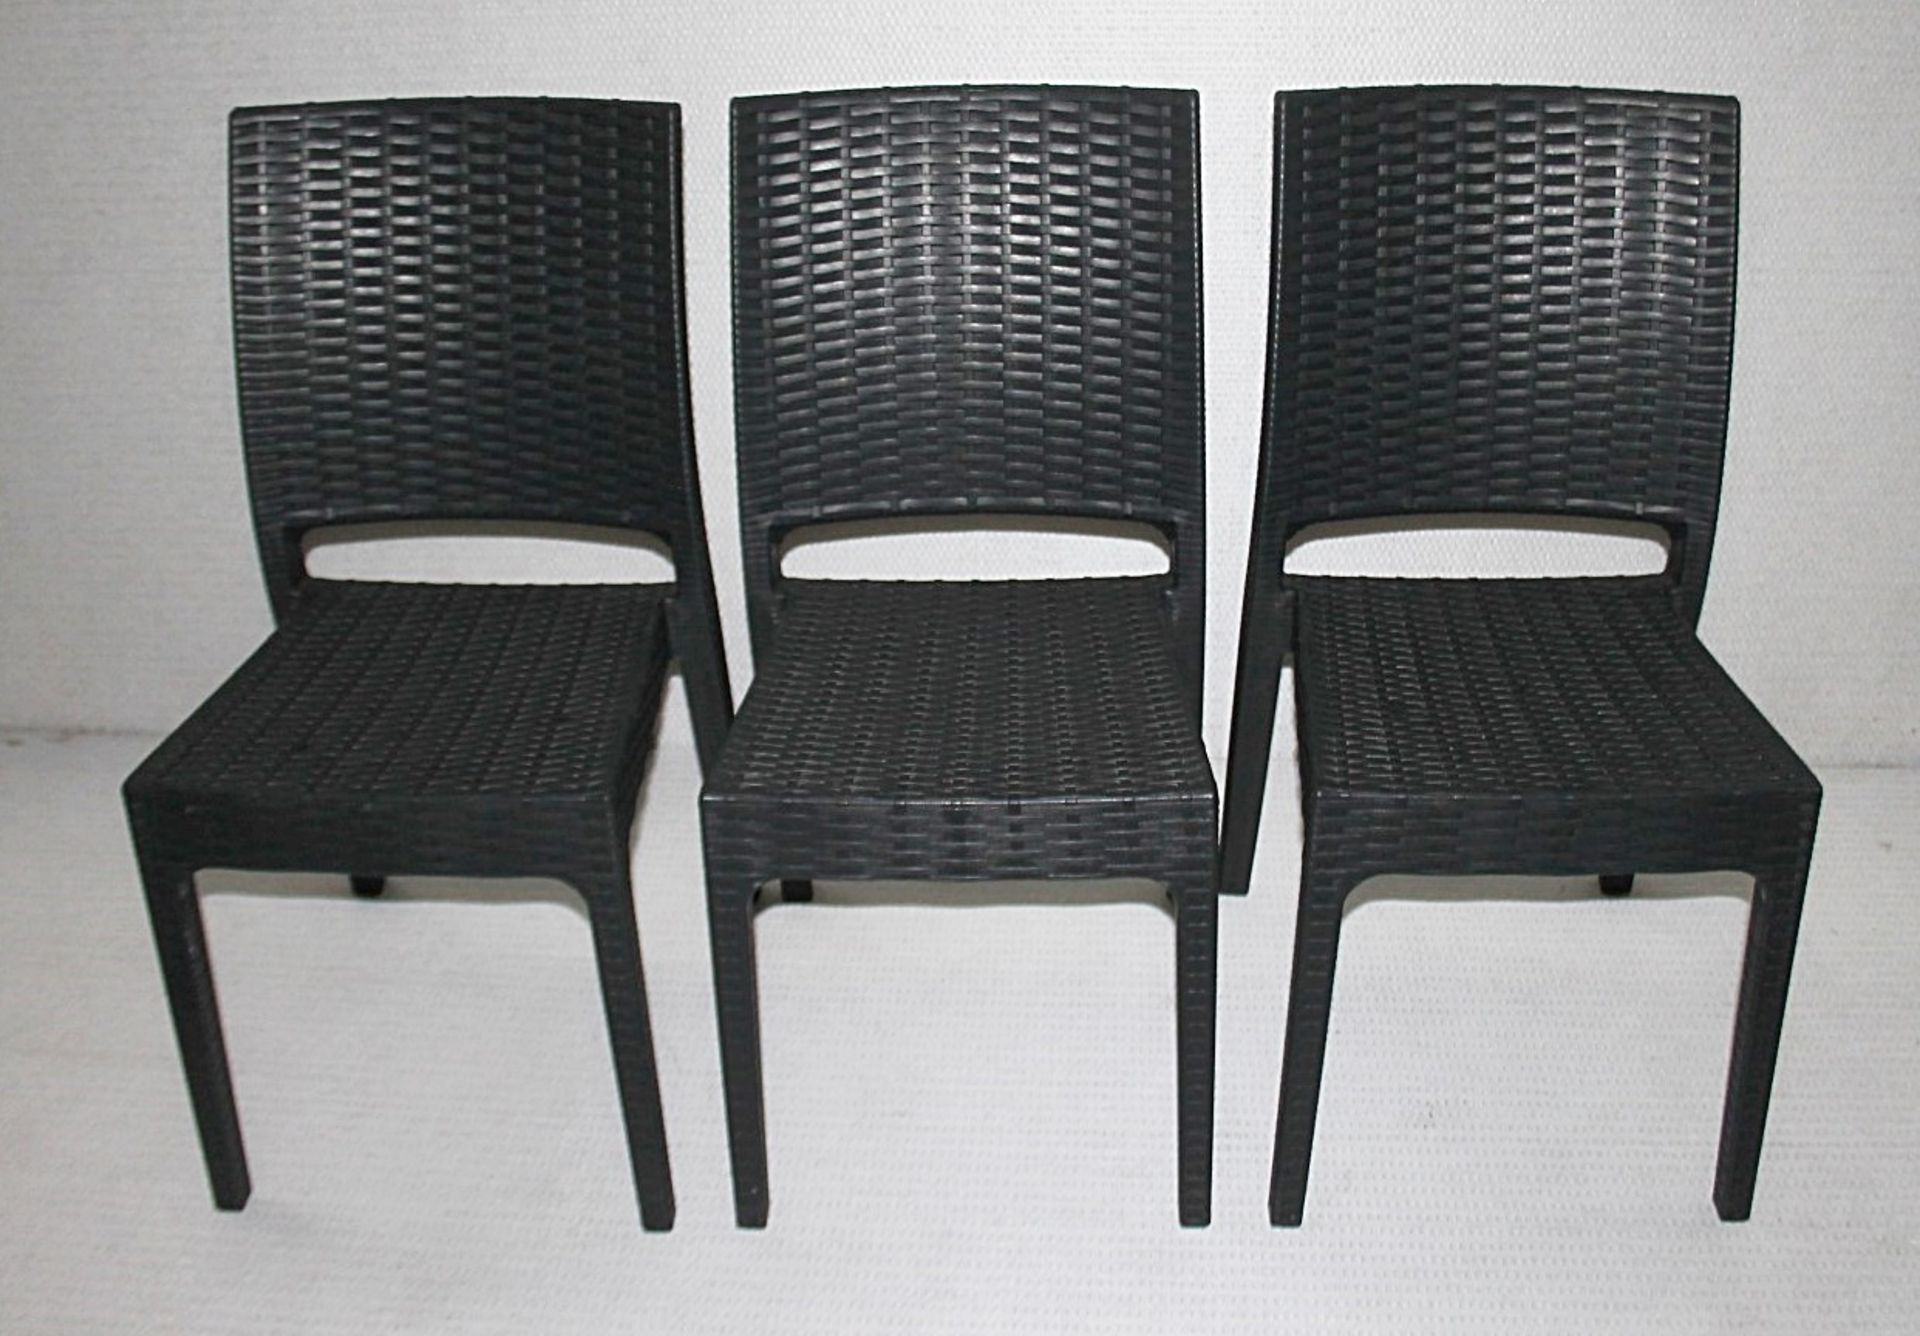 8 x SIESTA EXCLUSIVE 'Florida' Commercial Stackable Rattan-style Chairs In Dark Grey - CL987 - - Image 4 of 13